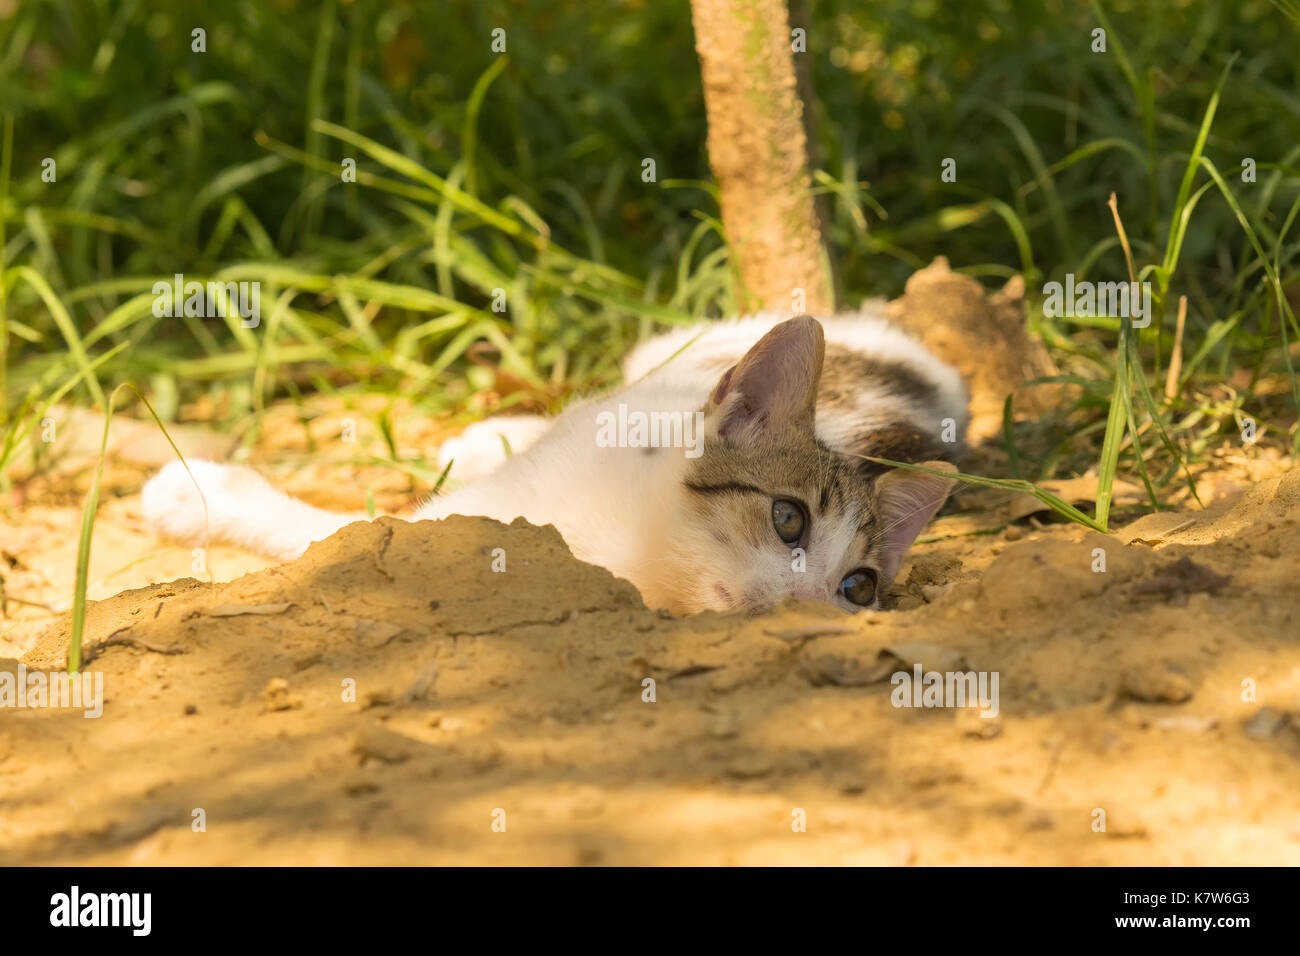 Cute baby cat playing and posing against a beautiful background. Stock Photo